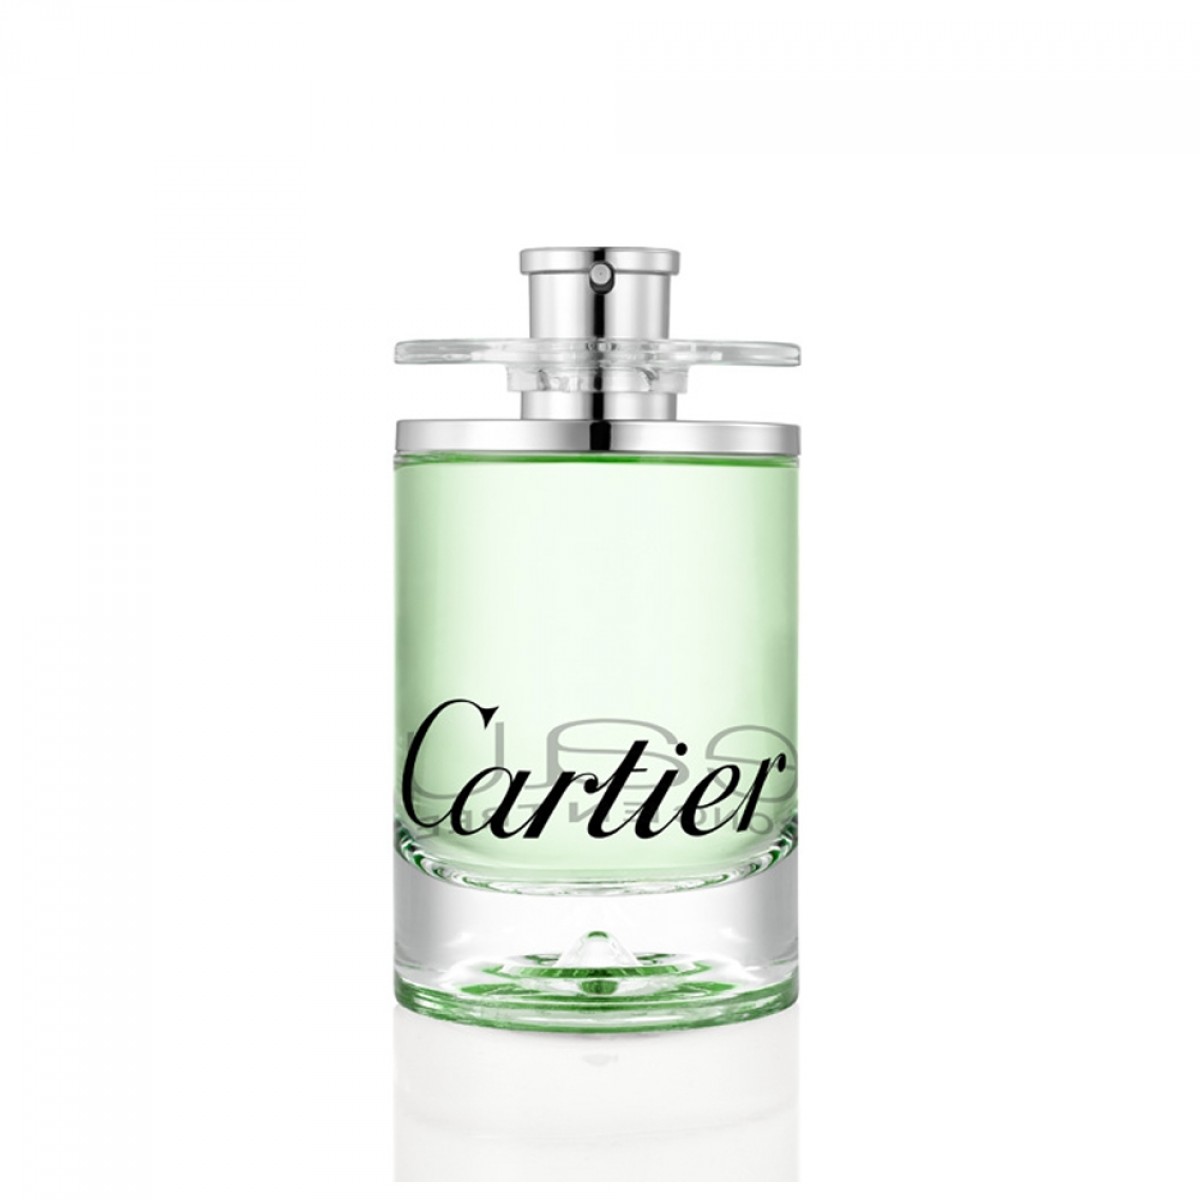 cartier bath products